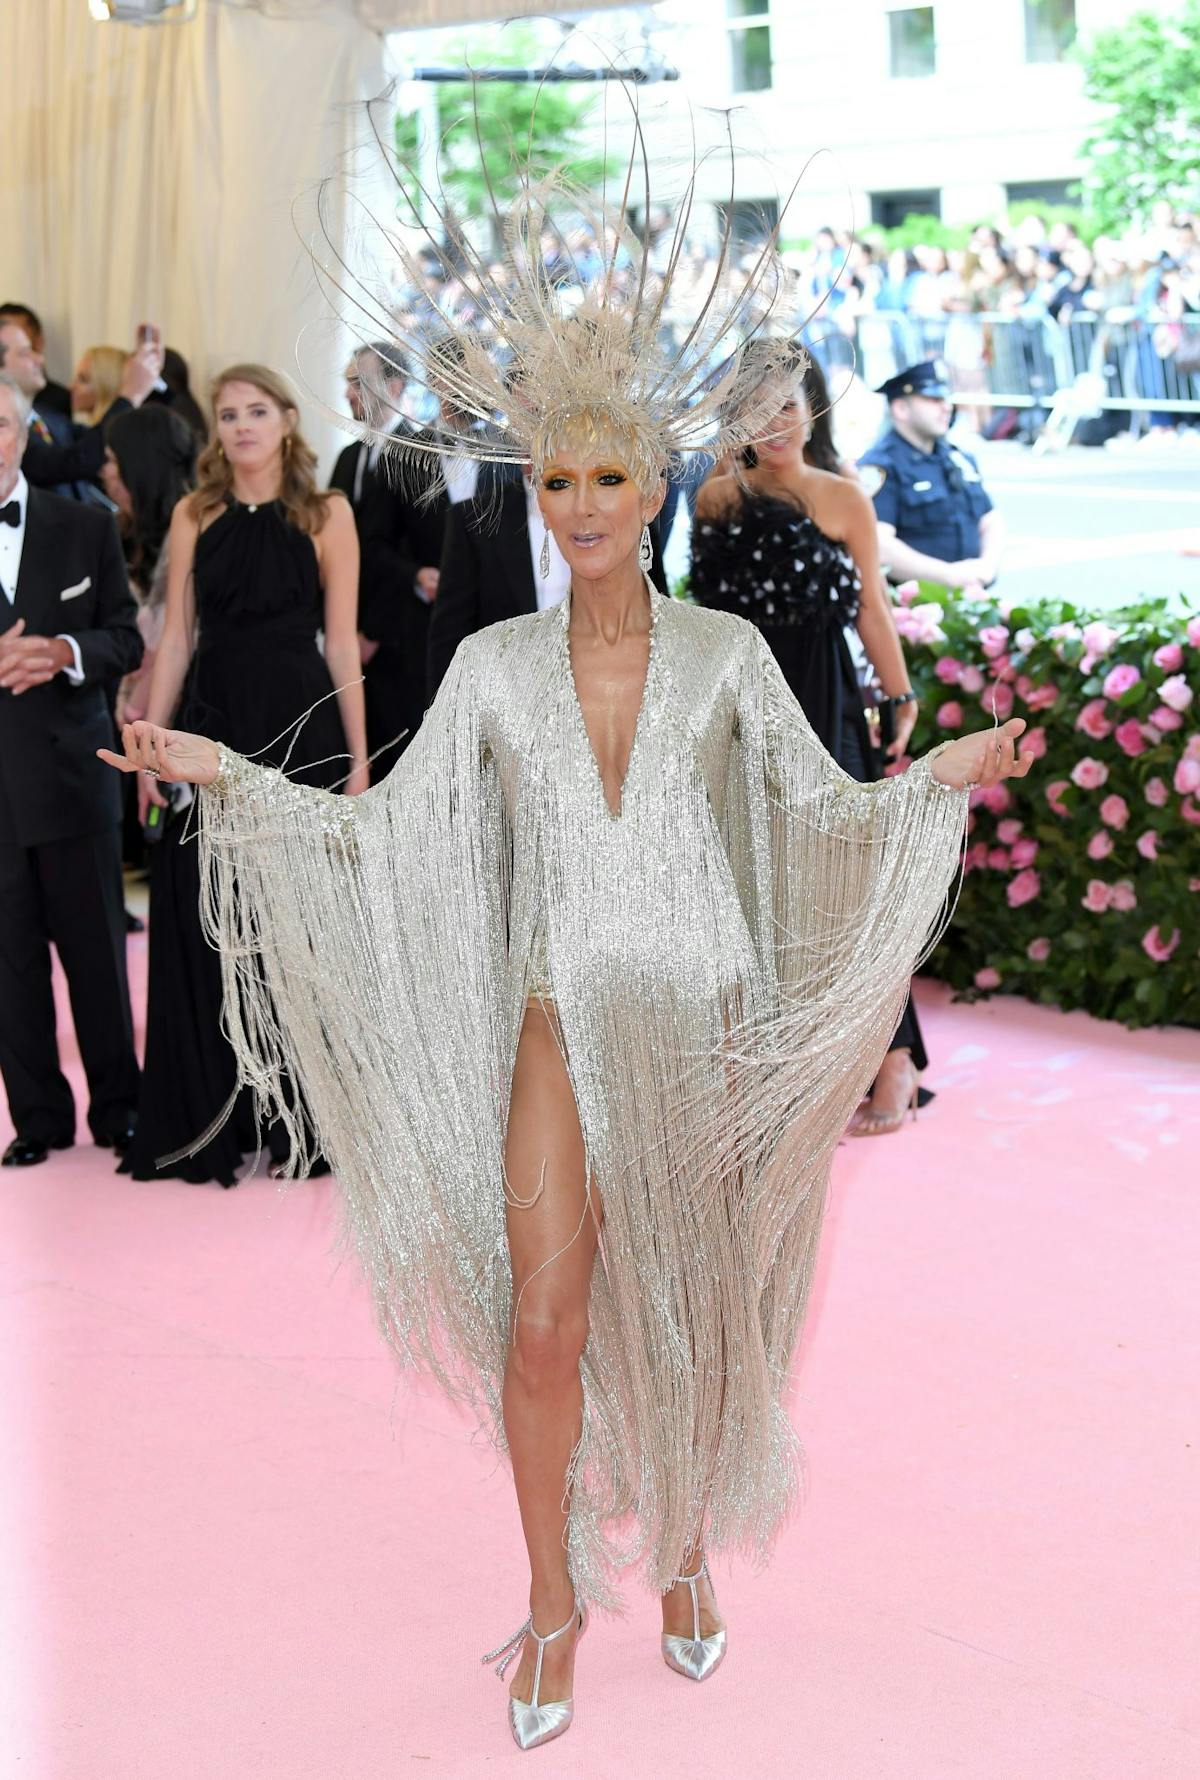 Met Gala 2019: political statements, the messages you missed